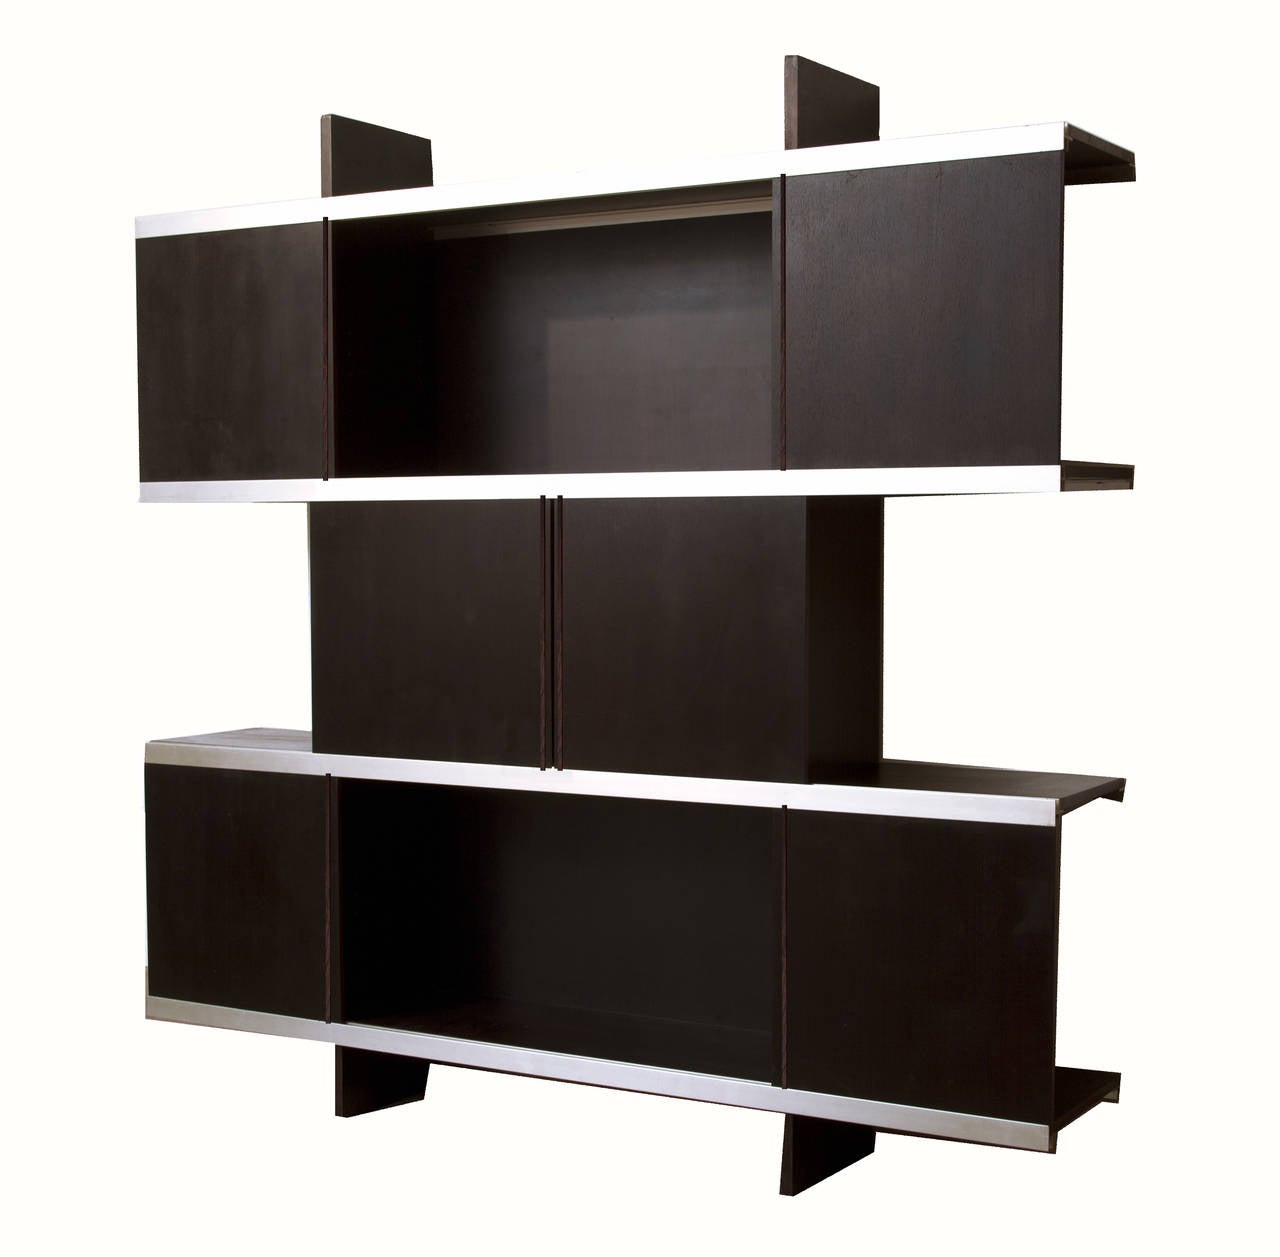 Important Bookcase "Multiuse" by Angelo Mangiarotti 
produced by Poltronova in 1965 
six doors, three levels, different forms
rosewood and steinless steel 
Measures: CM 196X195X36

In Mangiarotti’s design activity, whose theoric